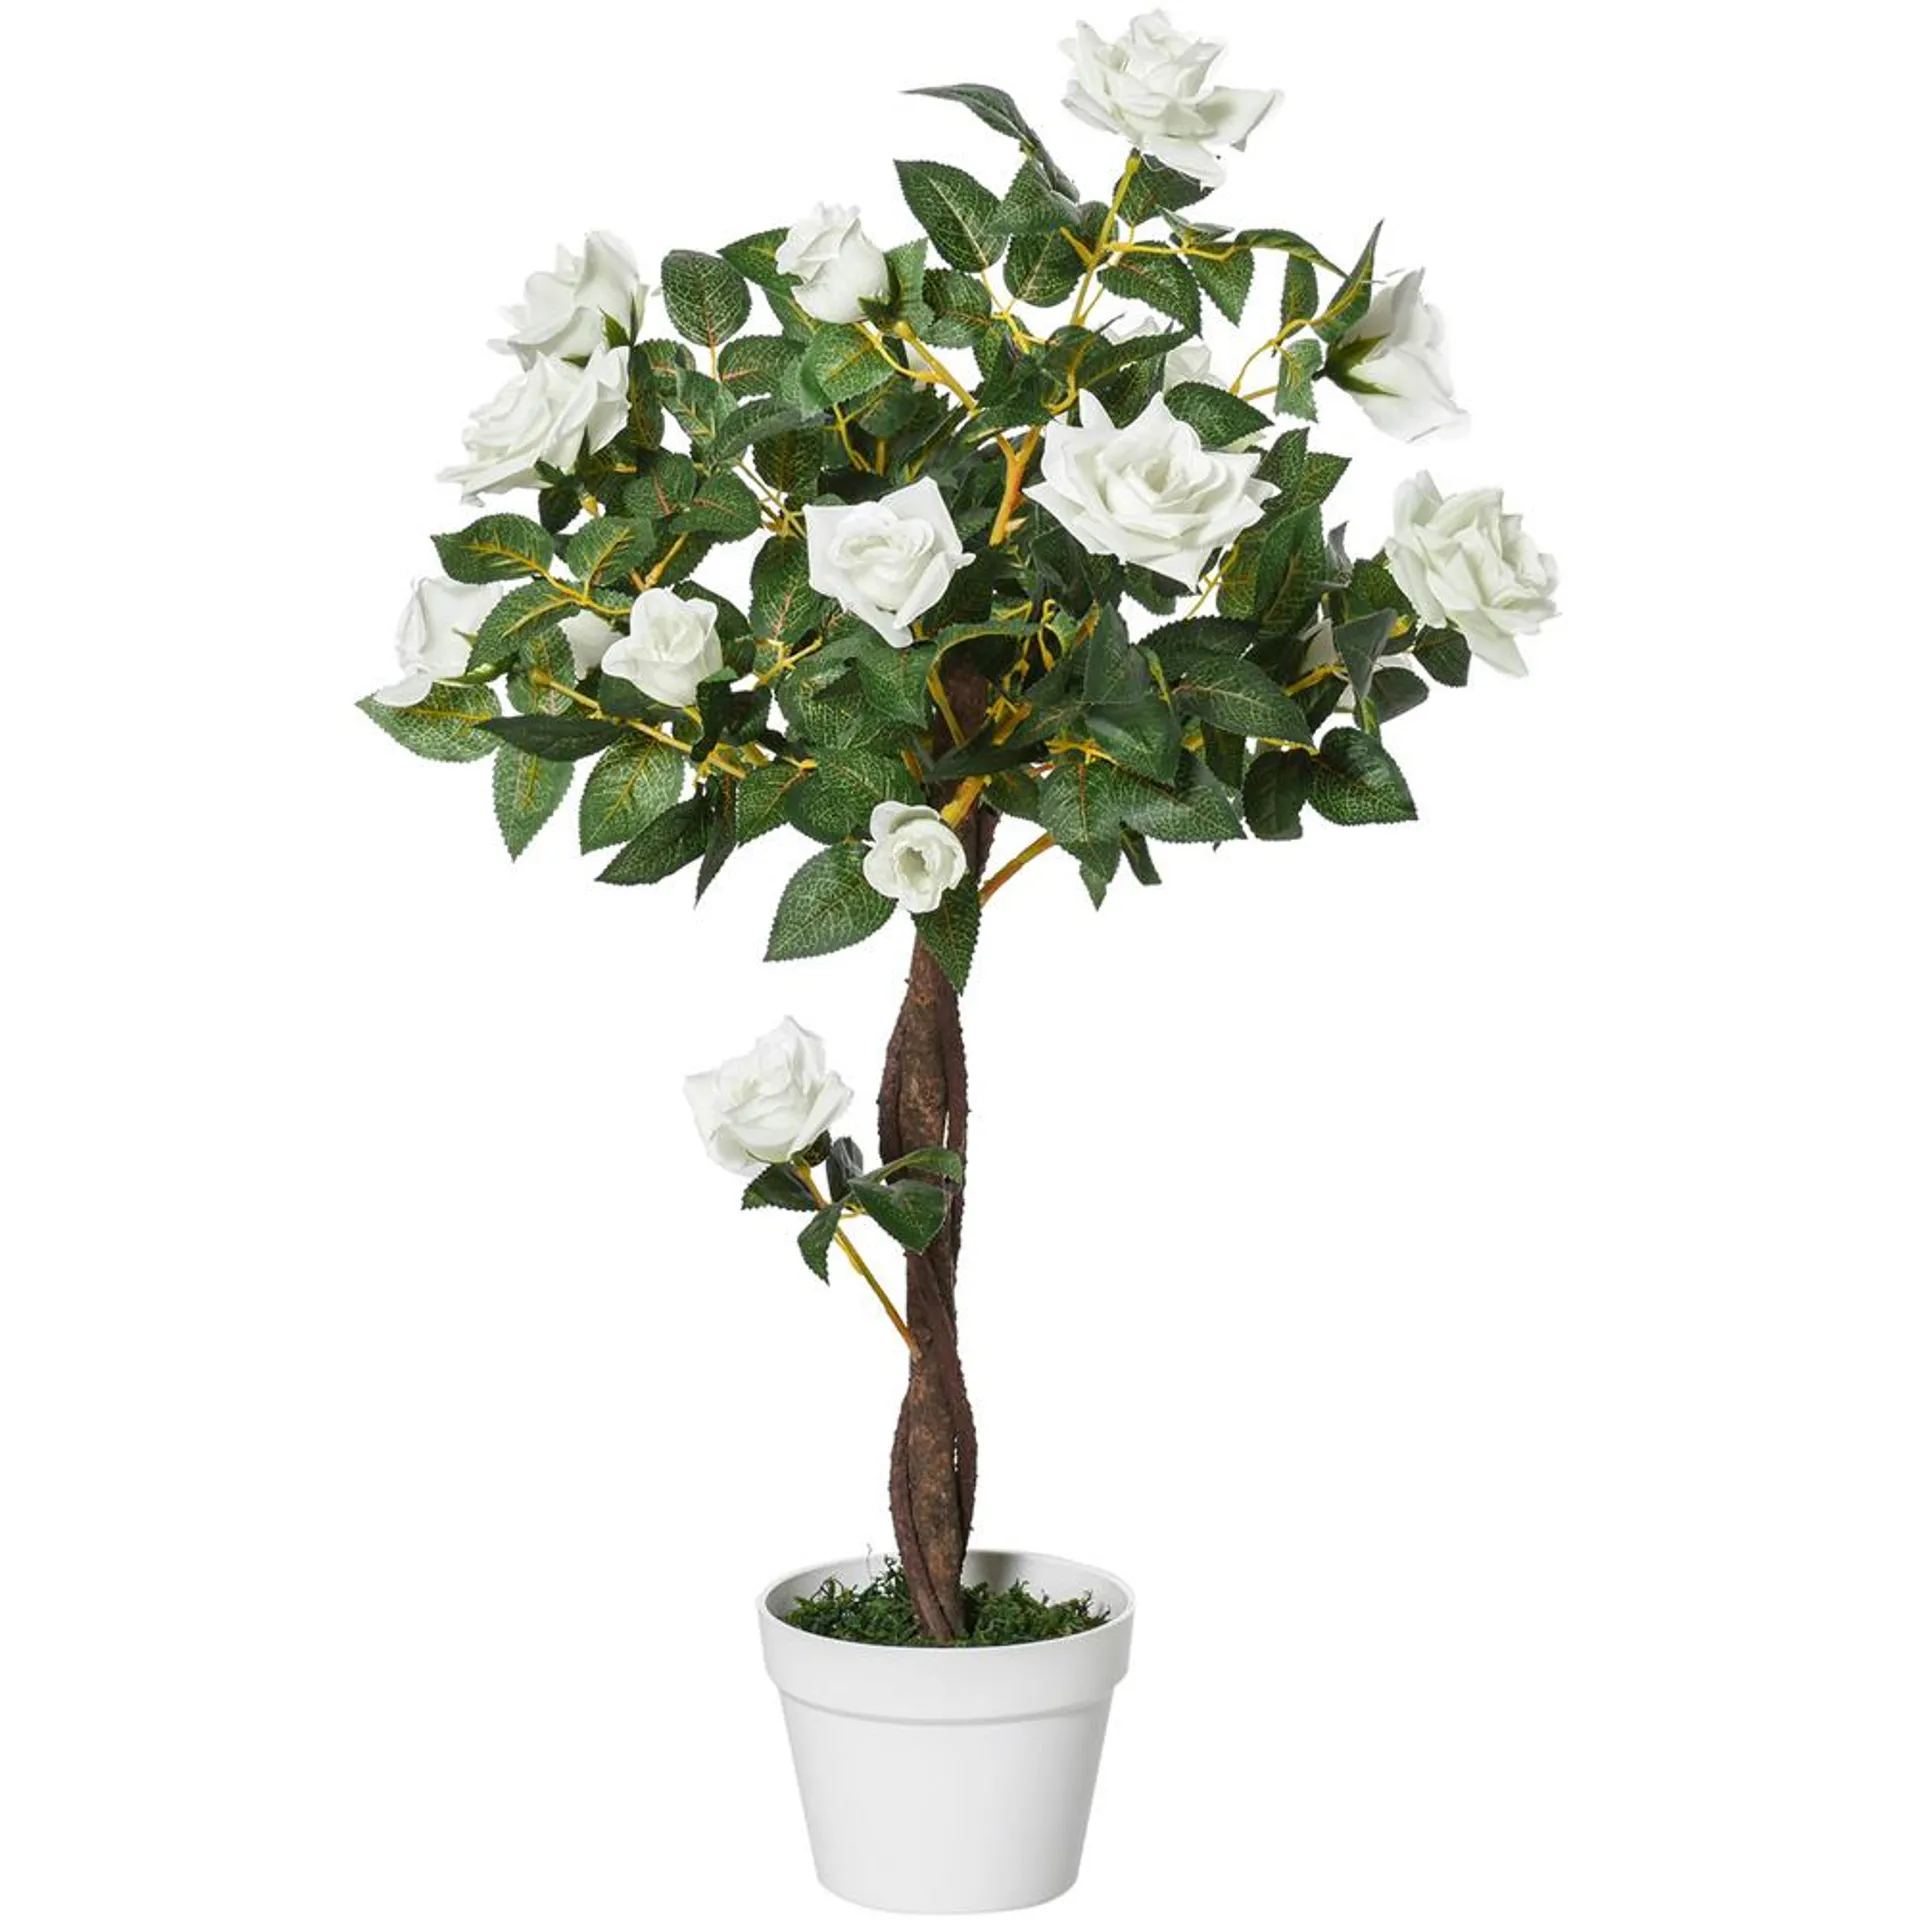 Outsunny White Flowers Rose Tree Artificial Plant In Pot 3ft